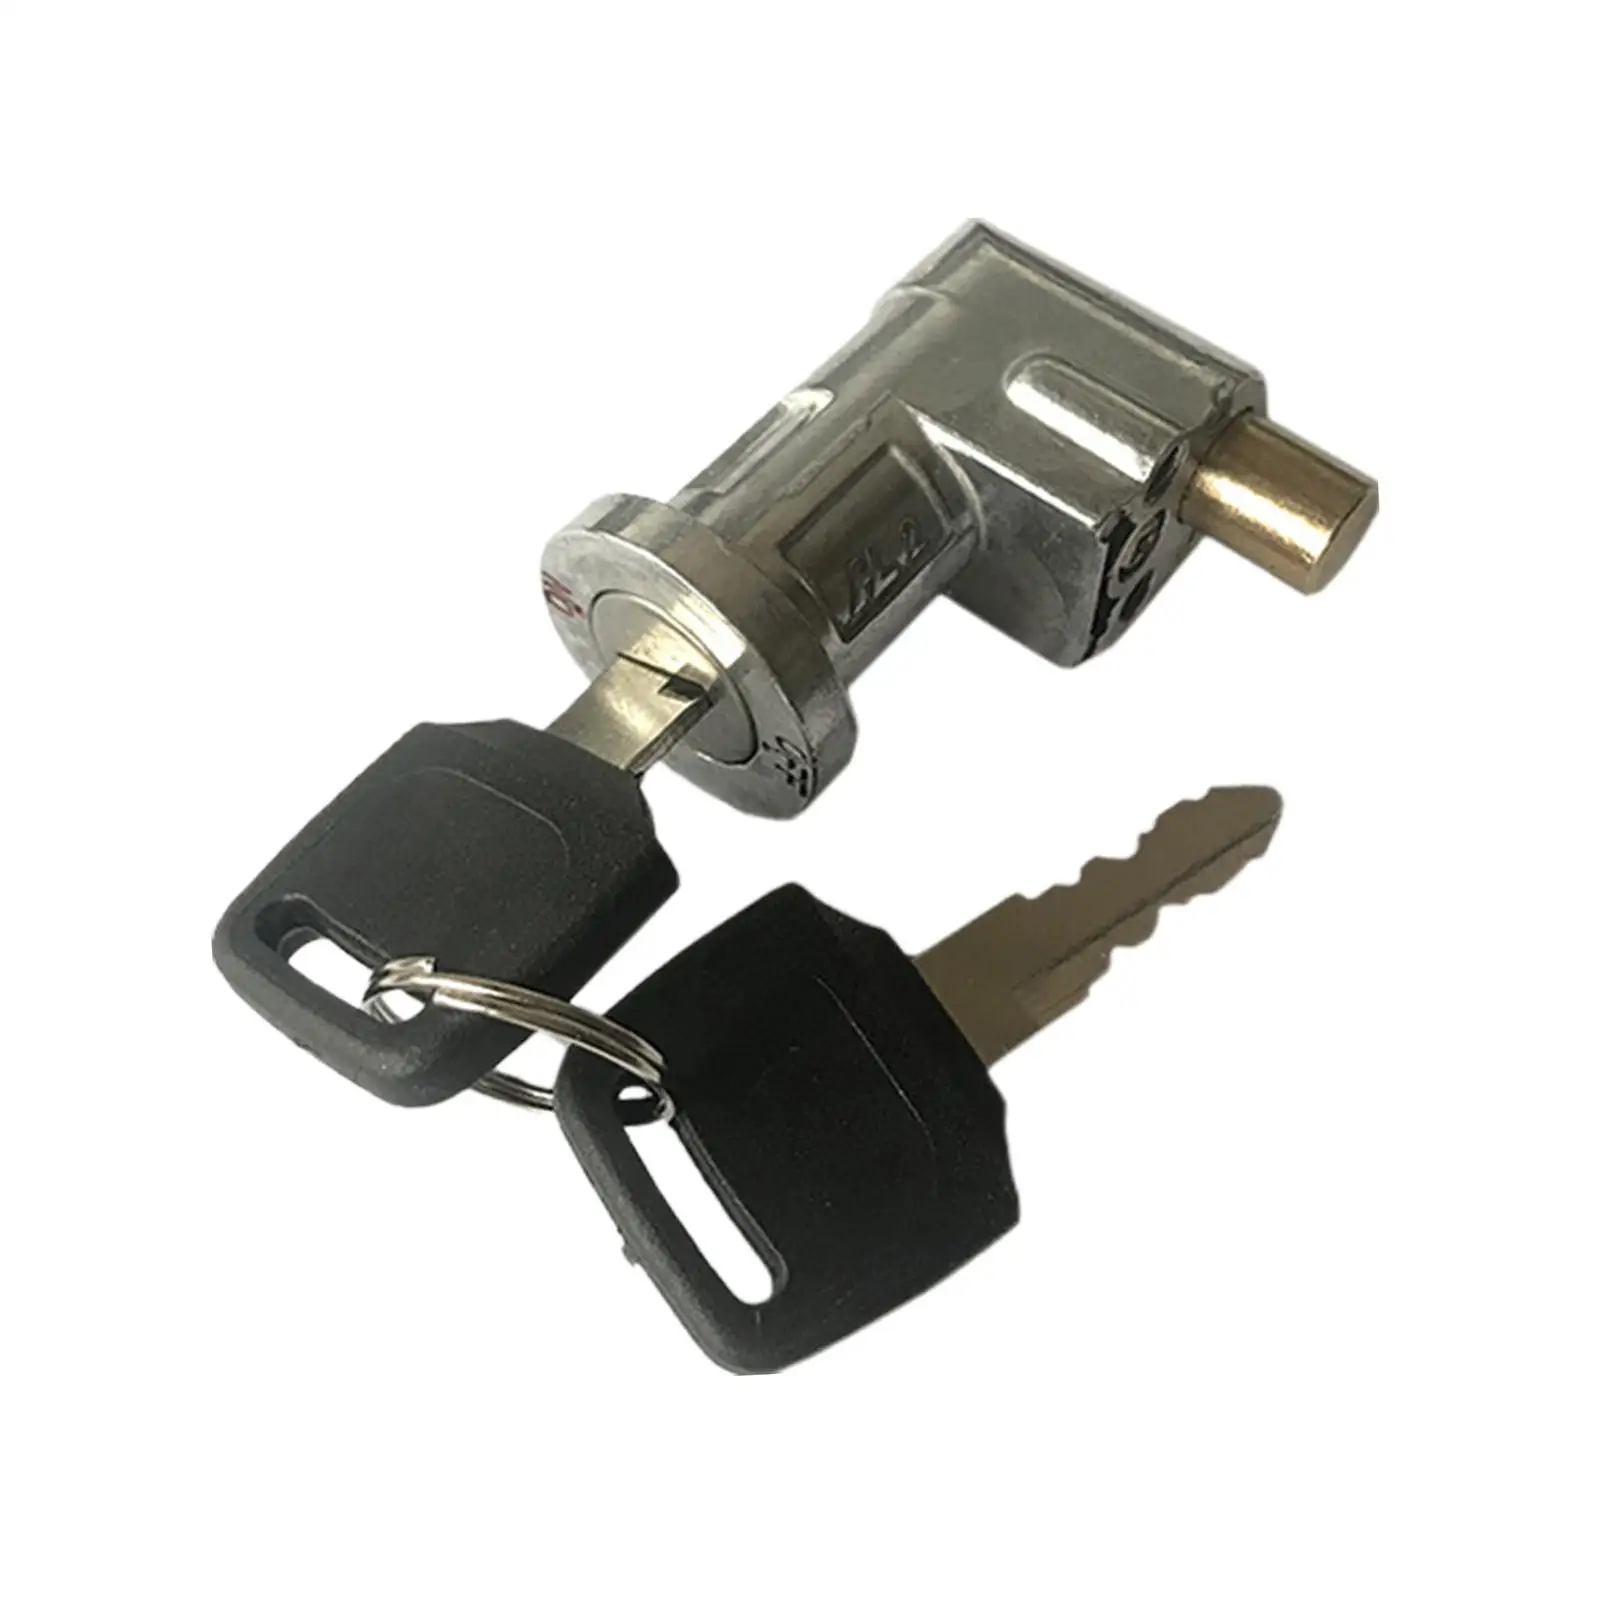 Battery Box Safety Lock Ignition Lock Key Switch on Off Key Switch Cylinder Lock Motorcycle Battery Locks for Electric Bikes